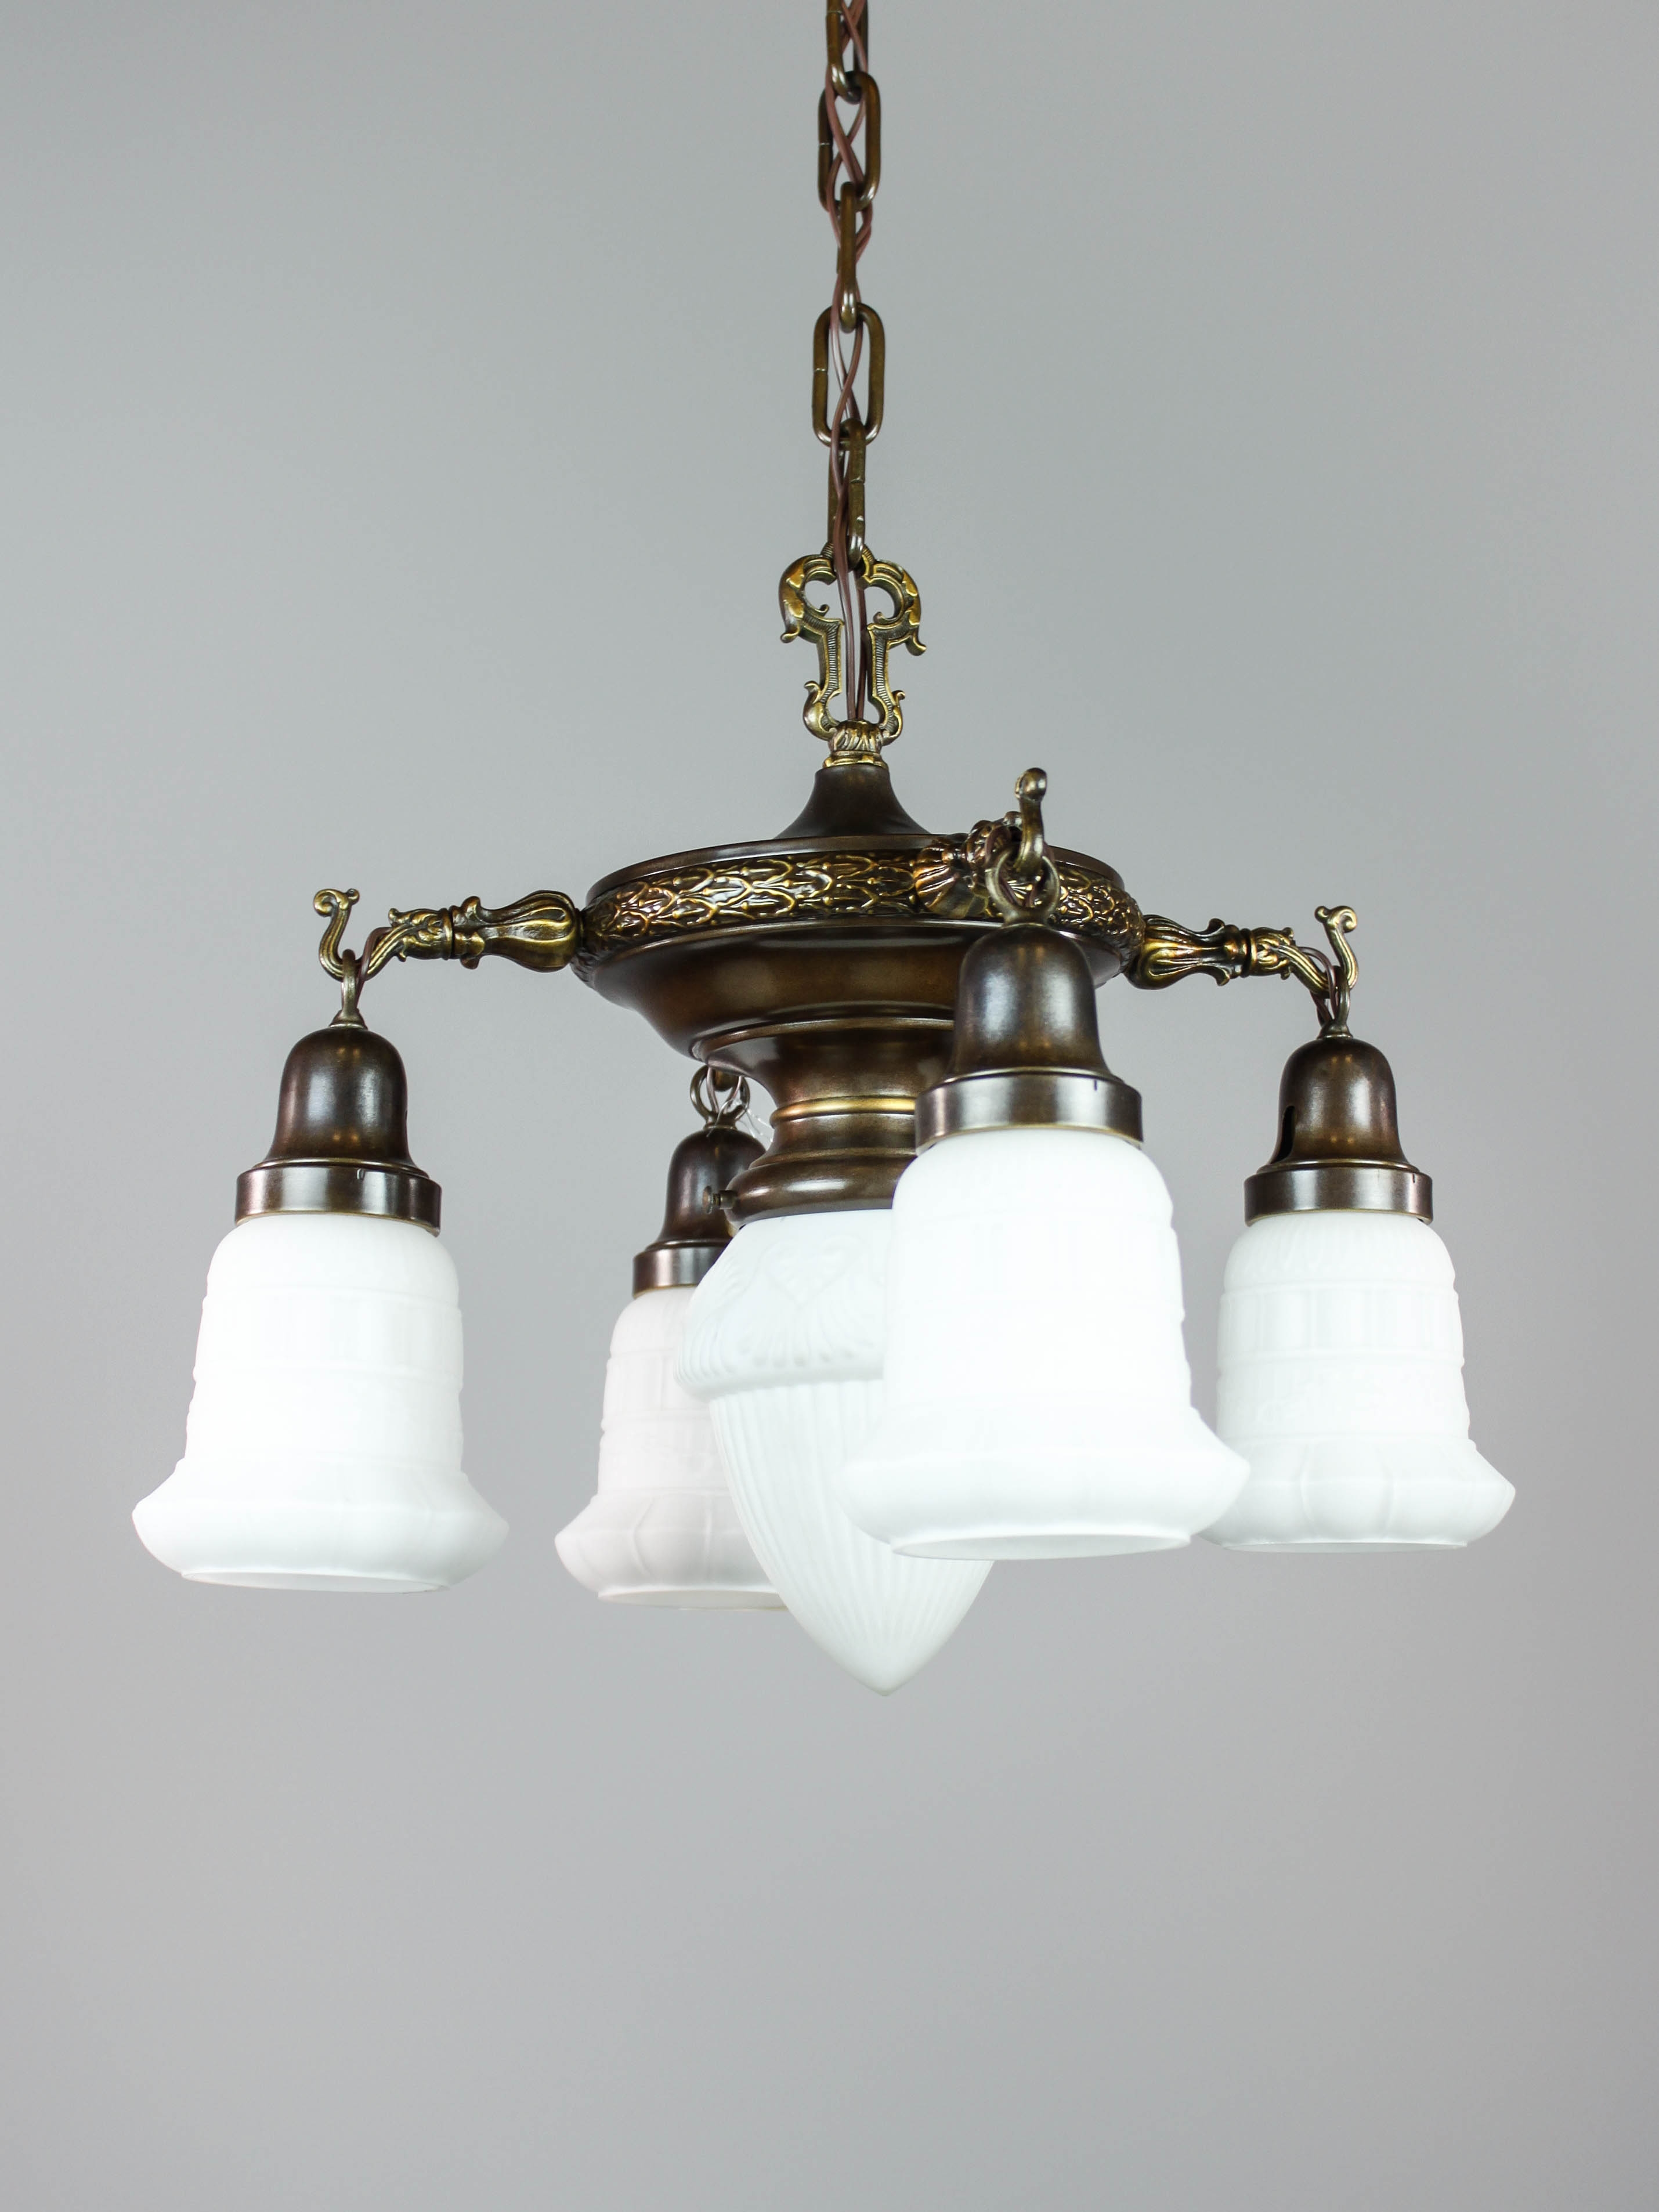 Colonial Revival Ceiling Lightscolonial revival pan light with center shade 5 light